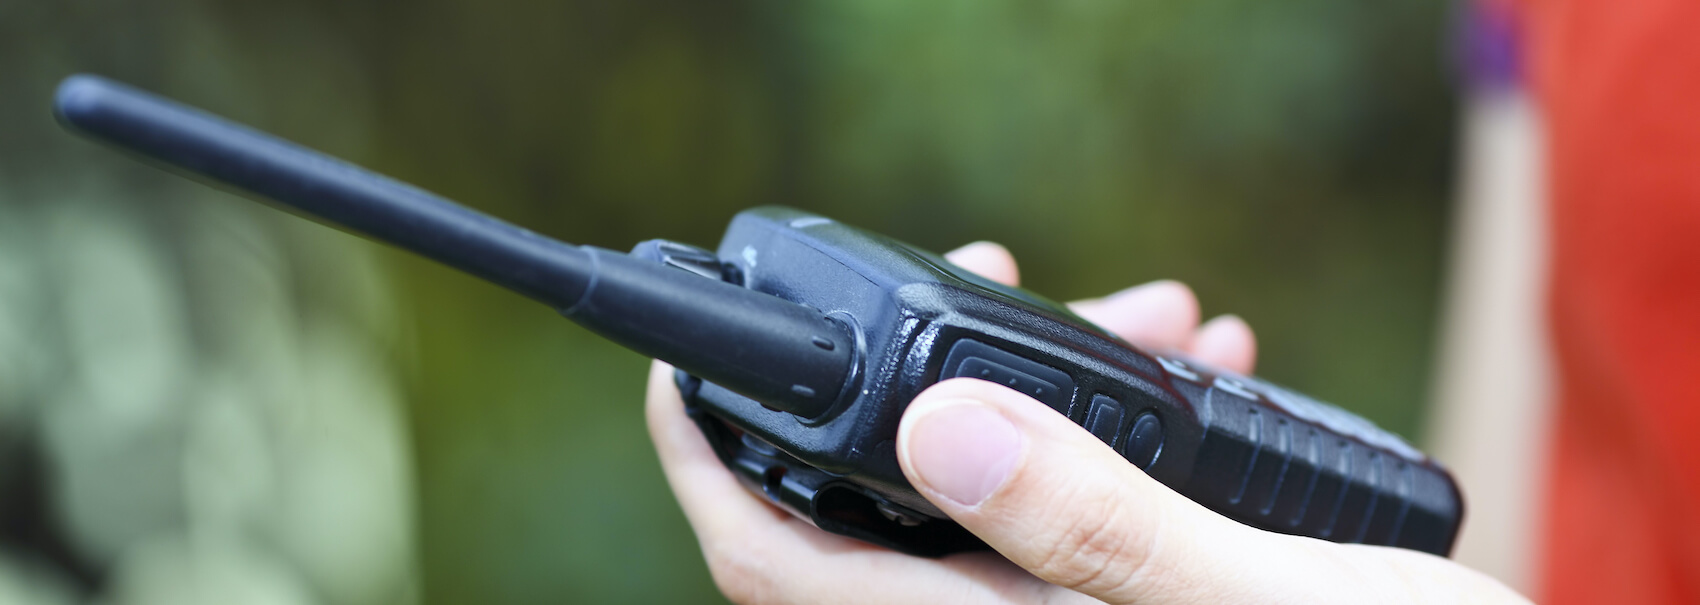 Best Two-Way Radios for the Mountains